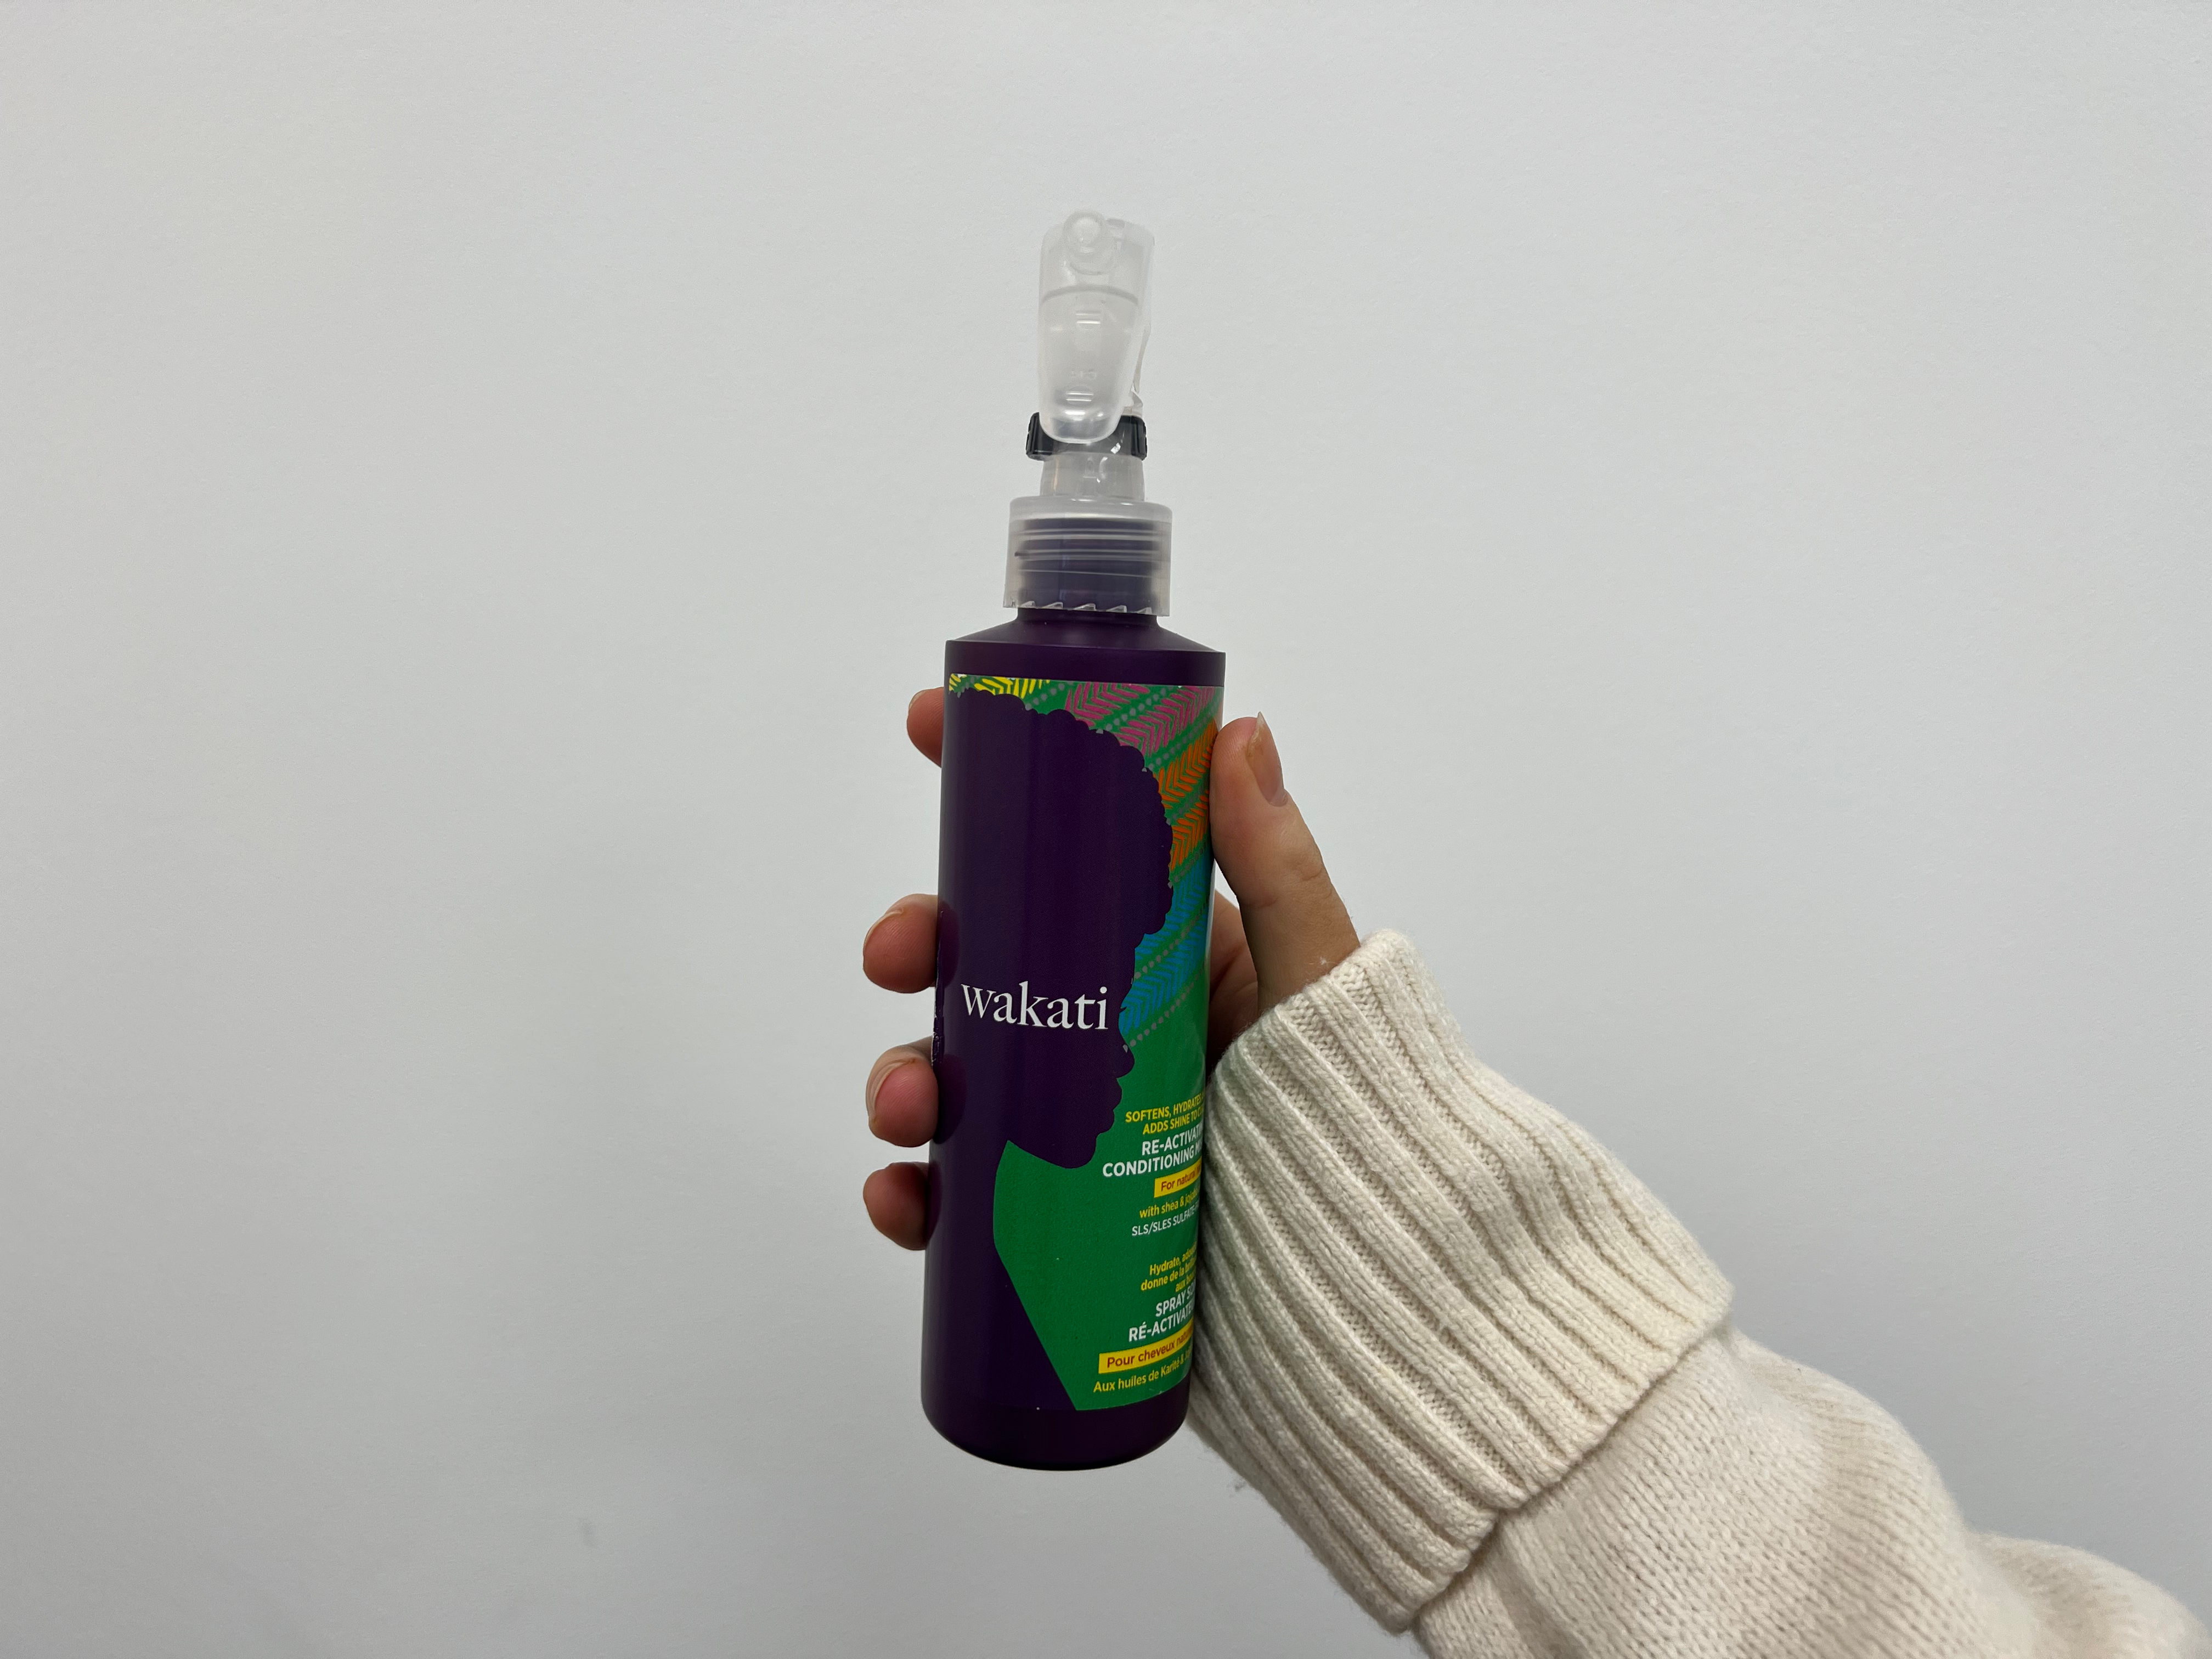 Wakati re-activating conditioning mist